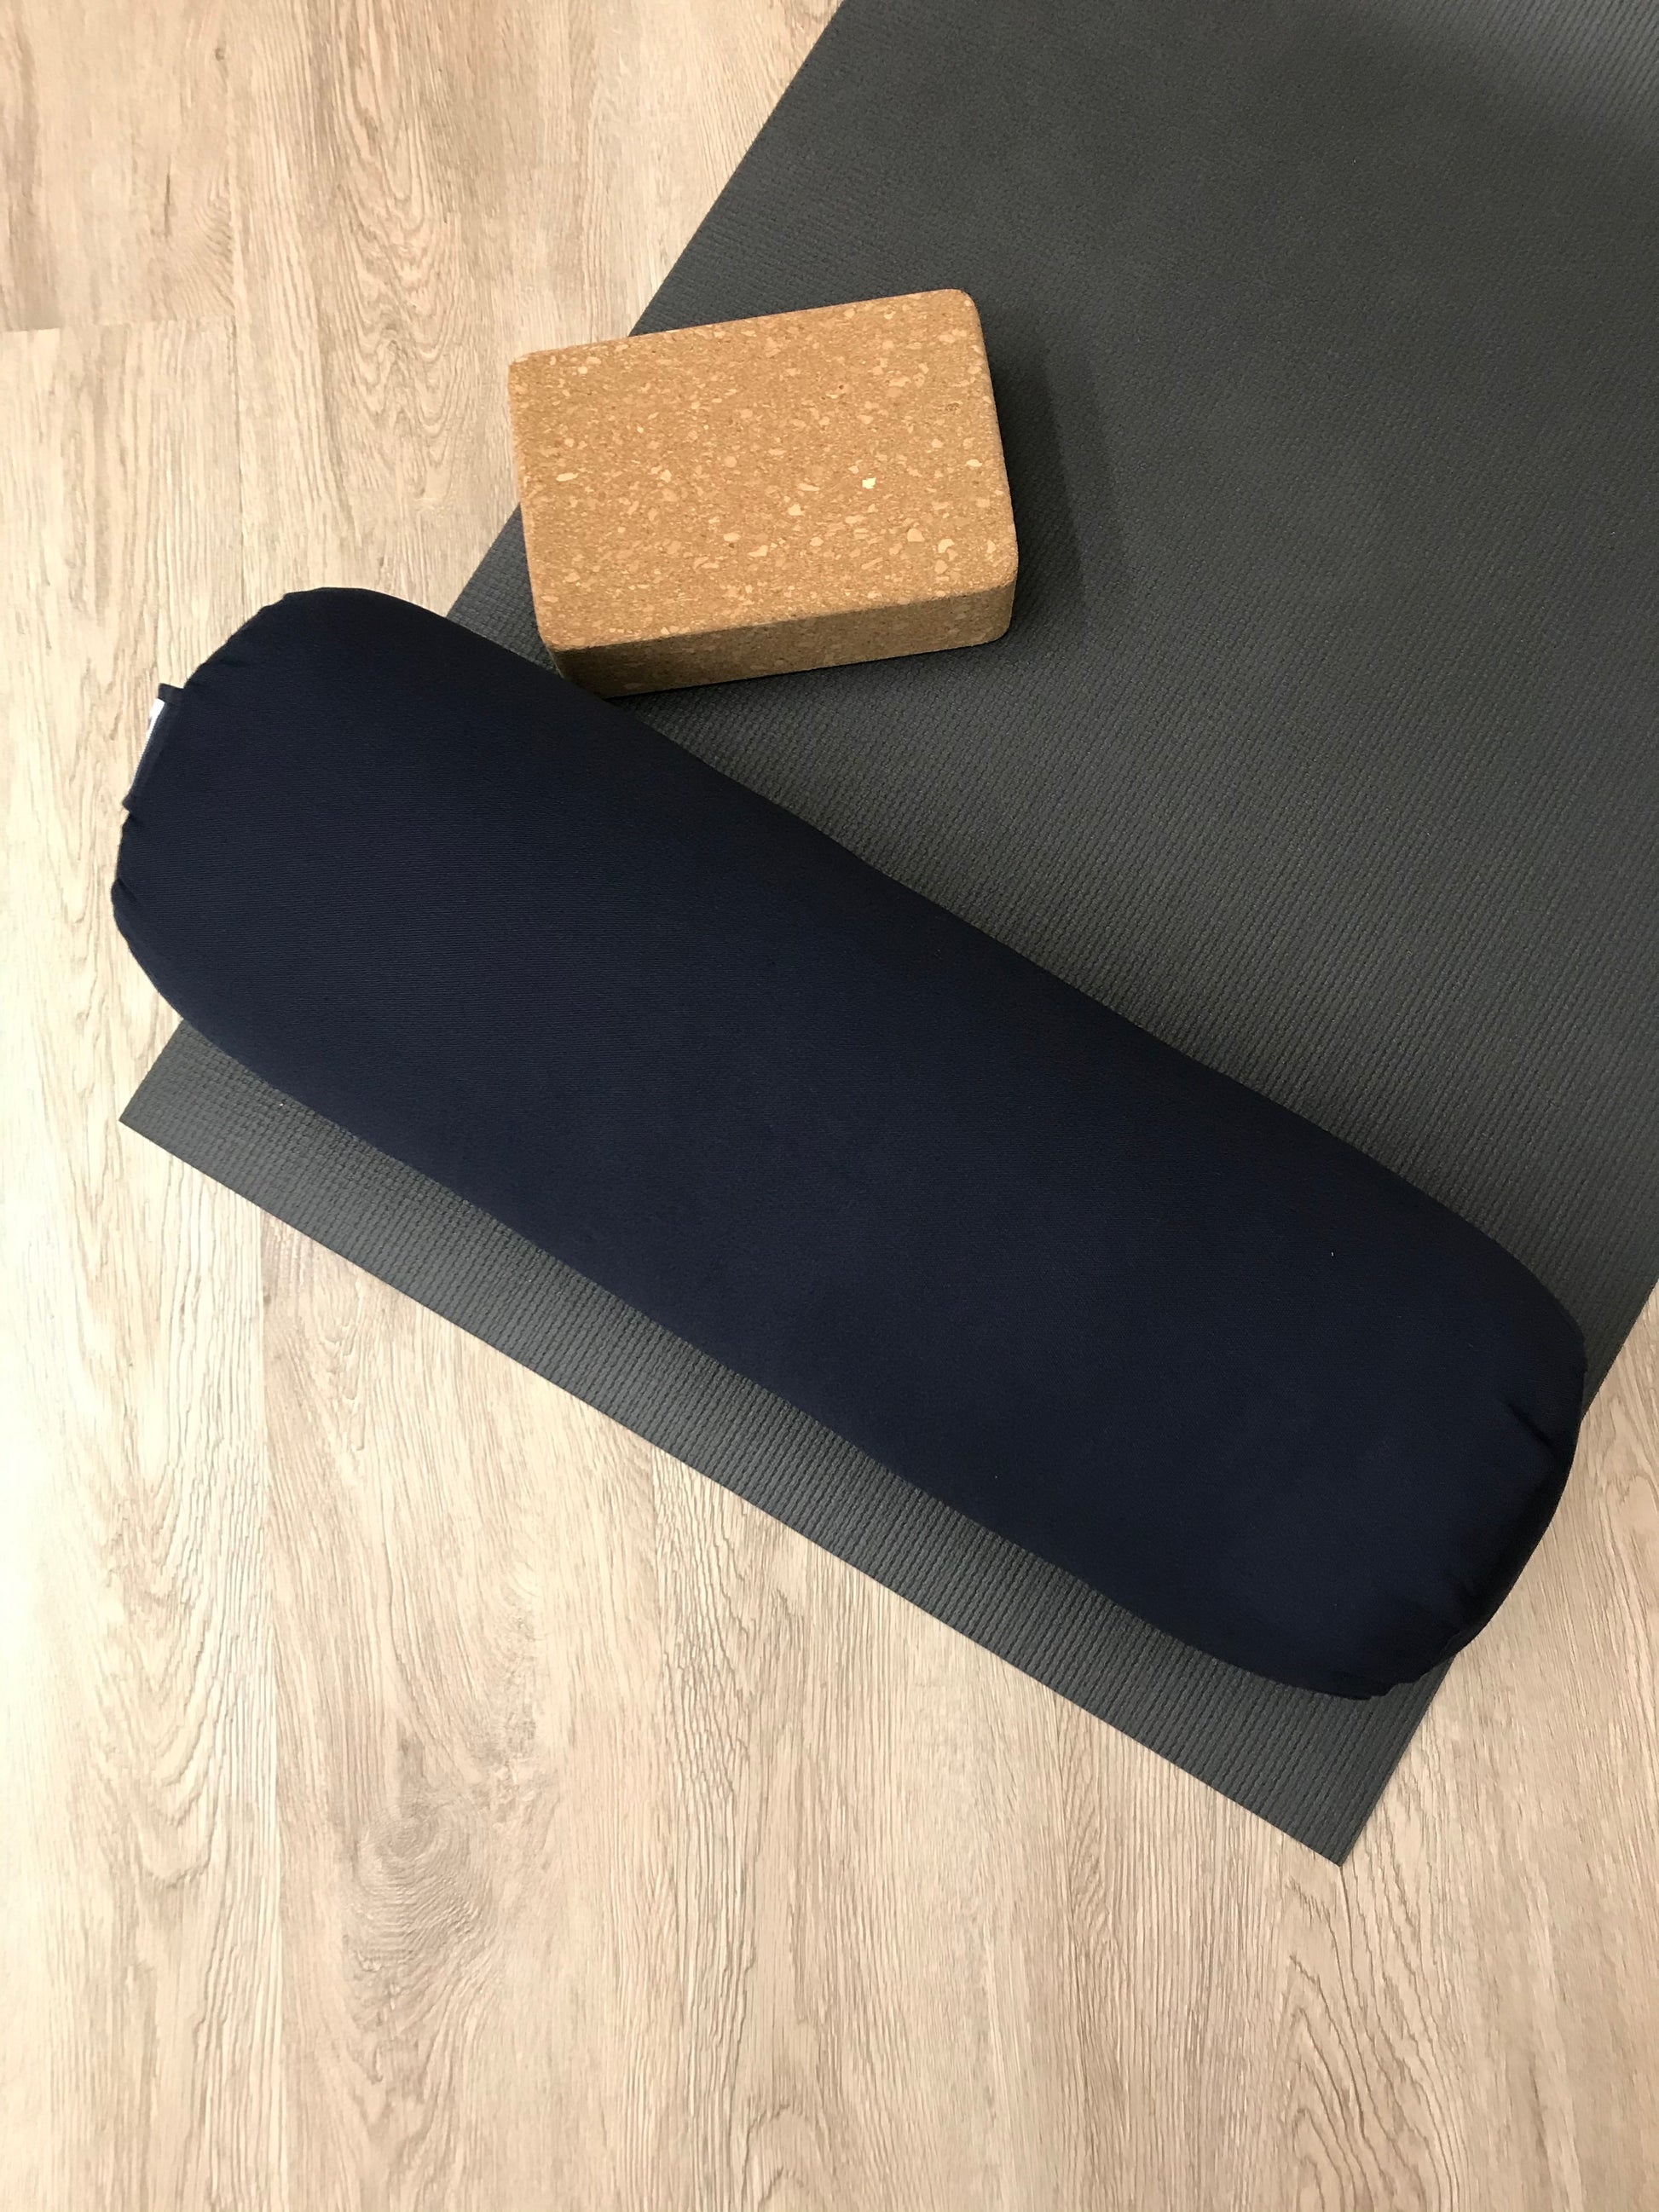 Round yoga bolster in durable cotton canvas, in solid navy blue fabric. Allergy conscious fill with removeable cover. Made in Canada by My Yoga Room Elements